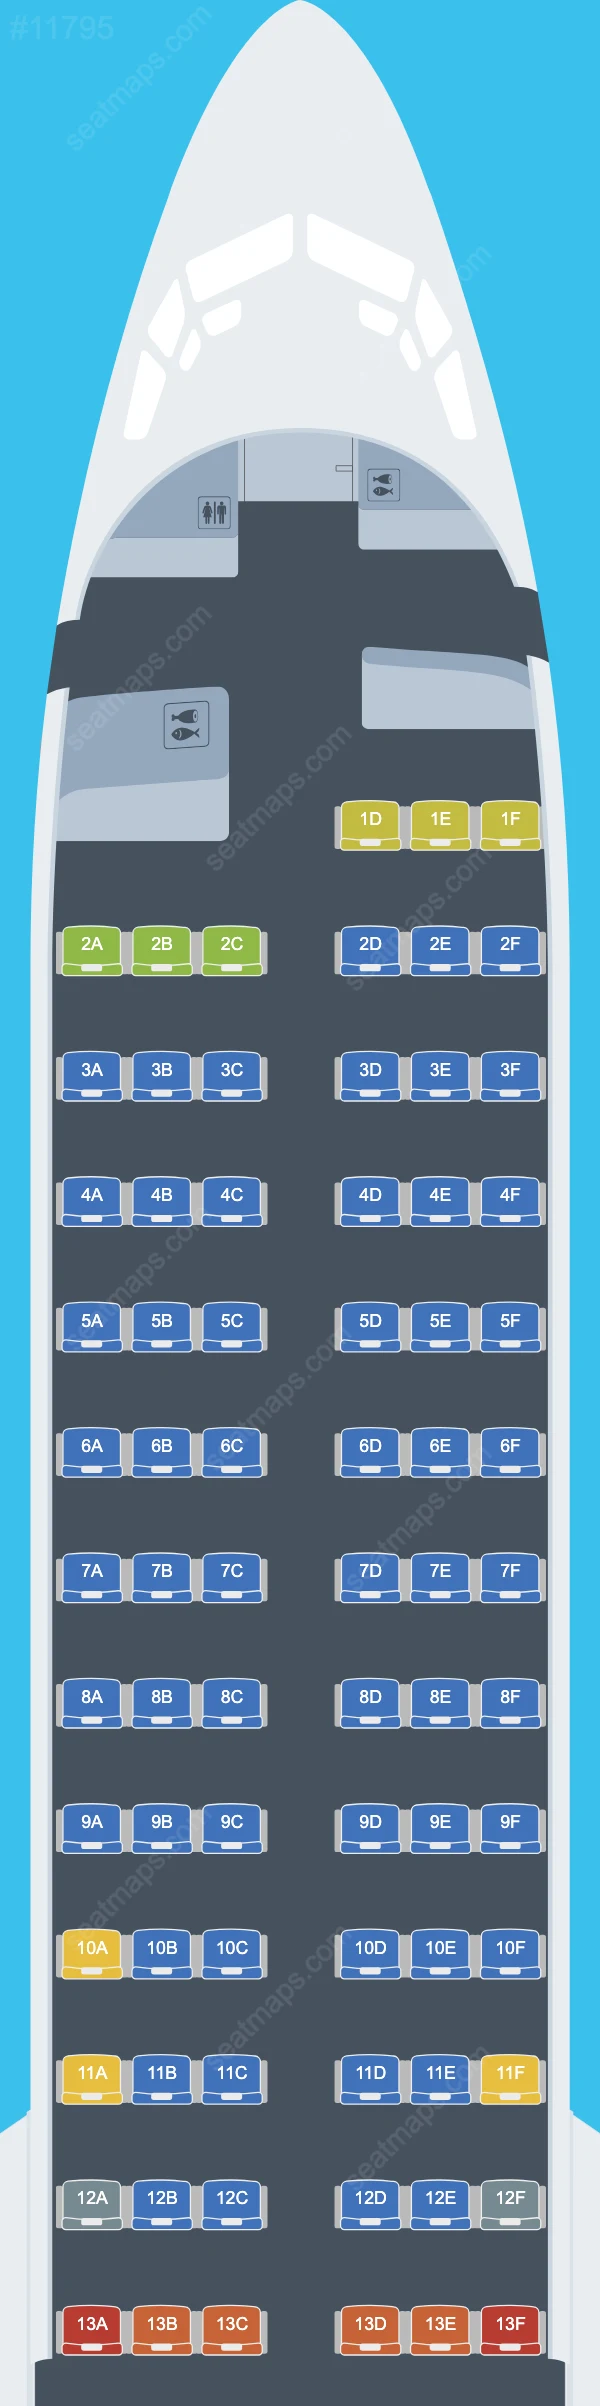 Airfast Indonesia Boeing 737 MAX 8 aircraft seat map  737 MAX 8